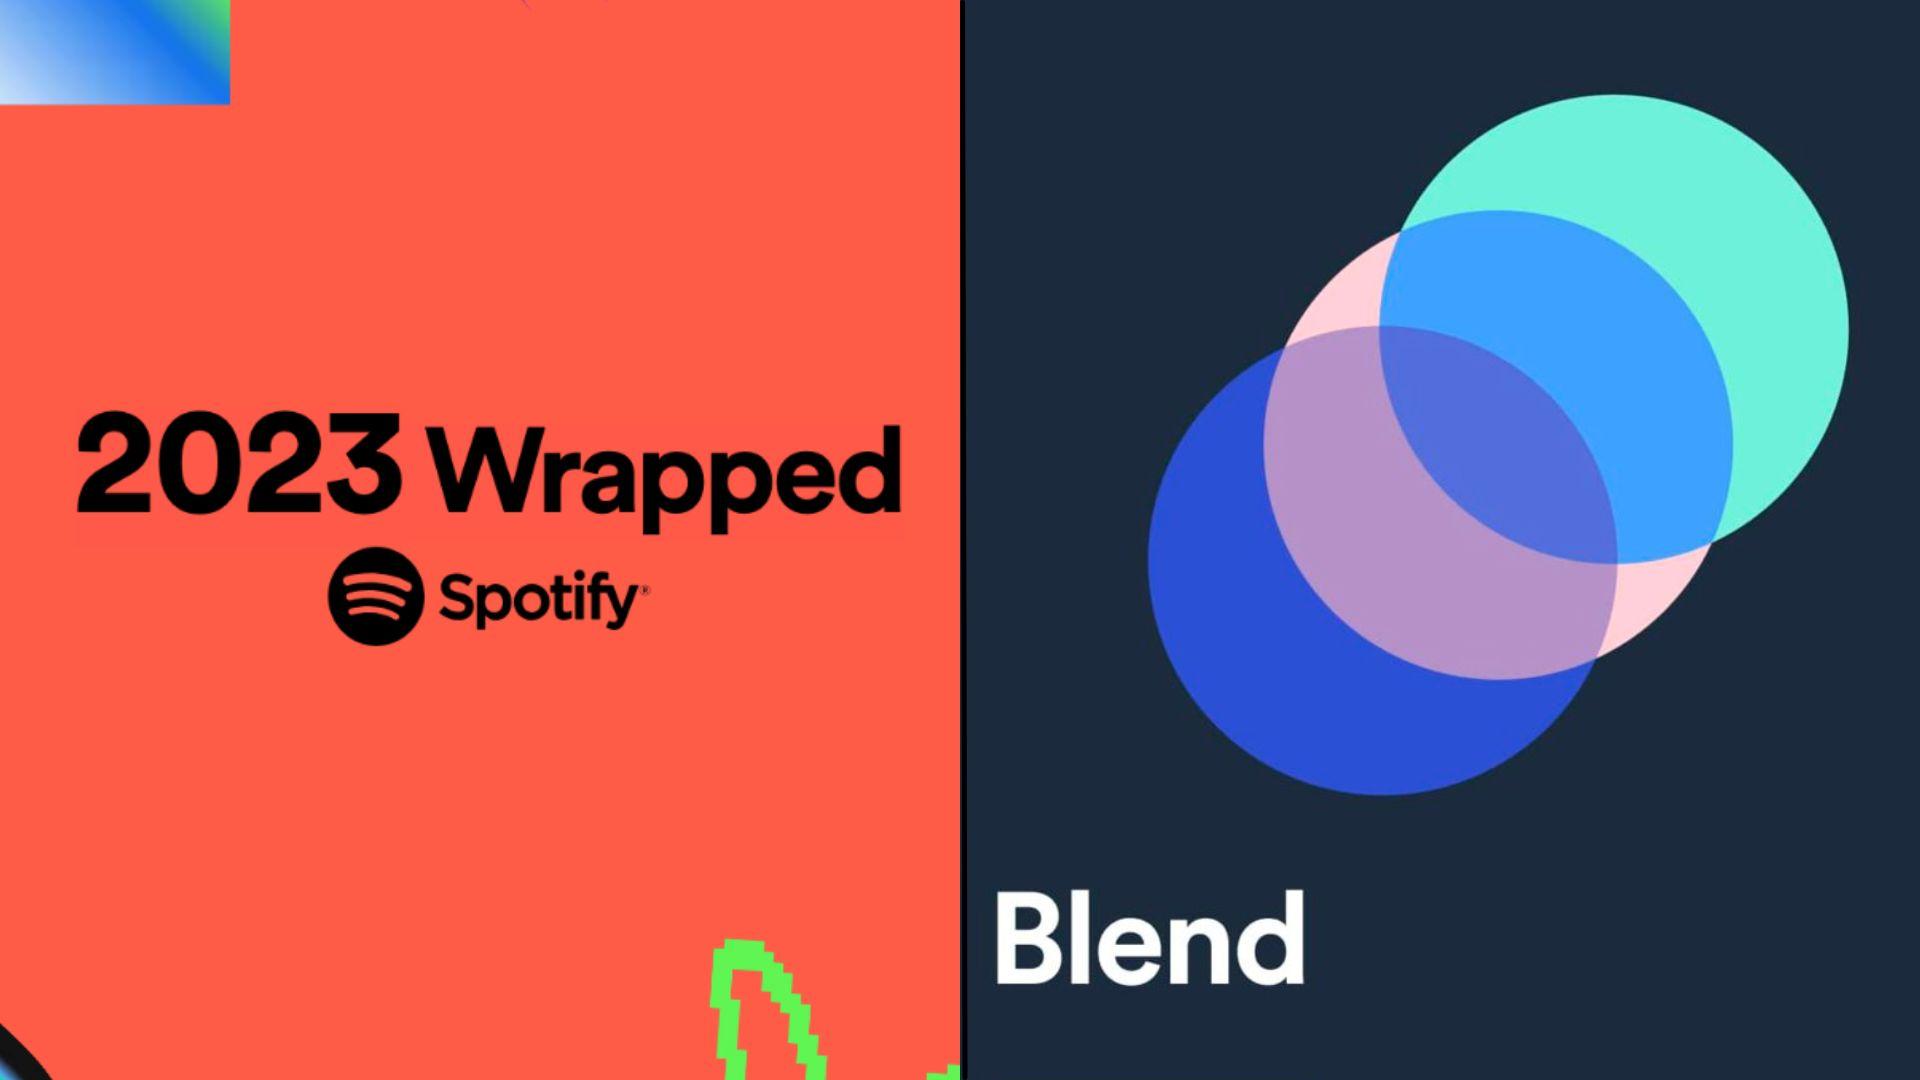 Spotify Wrapped 2023: How to get a Blend playlist - Dexerto